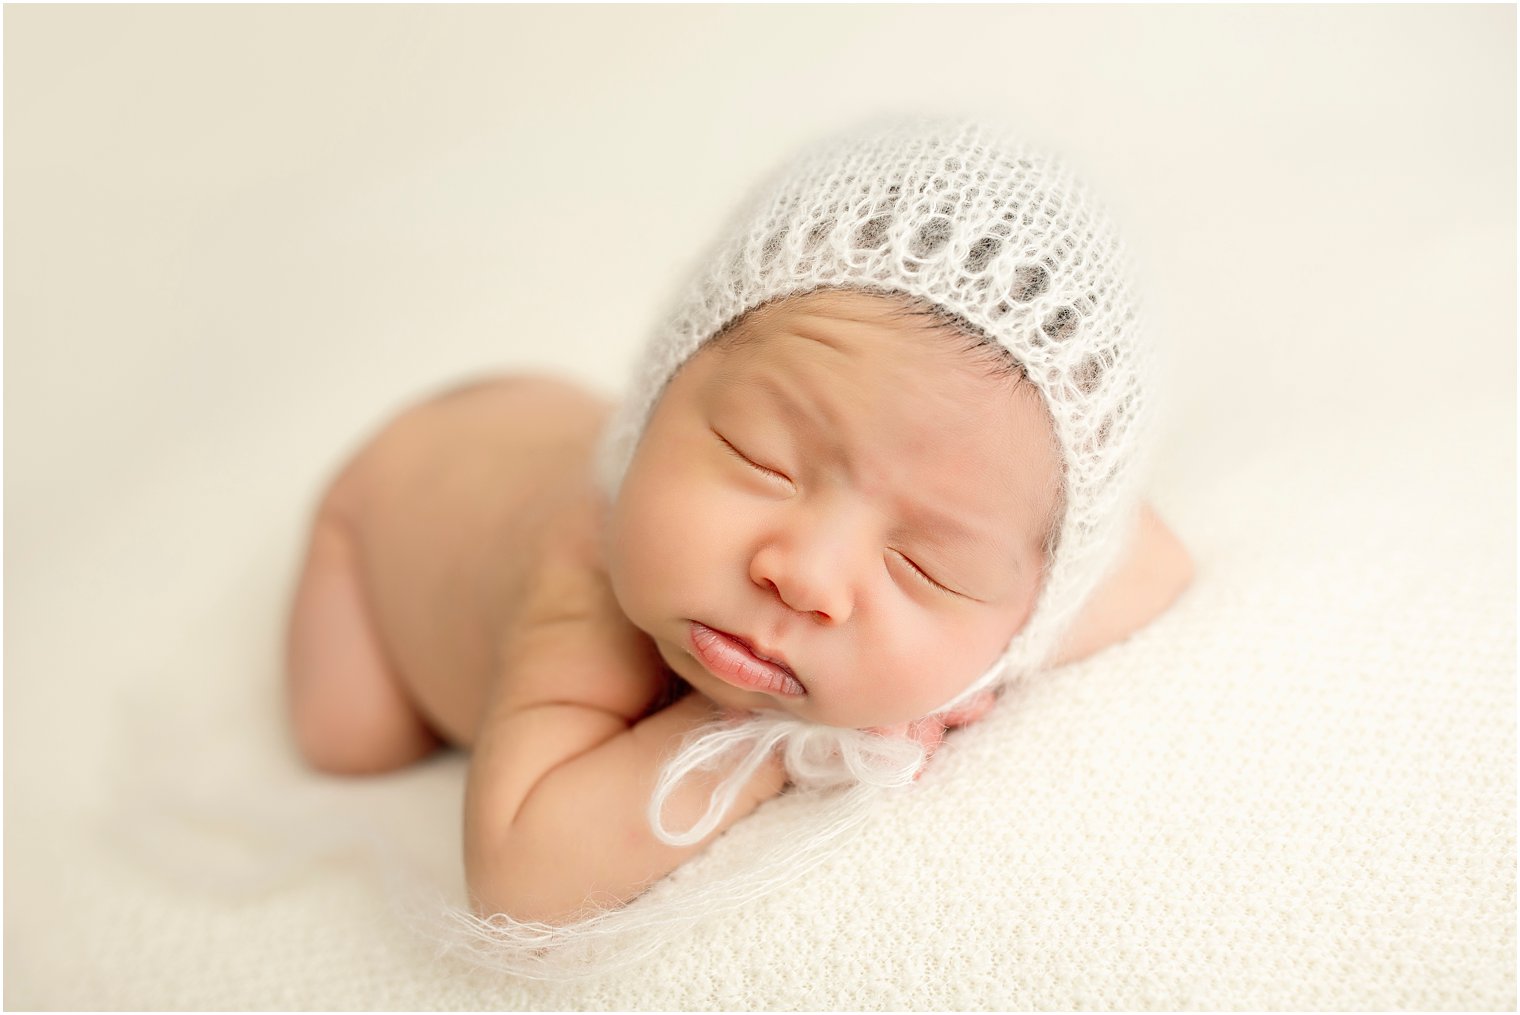 Newborn boy with knit hat from Blueberry Props